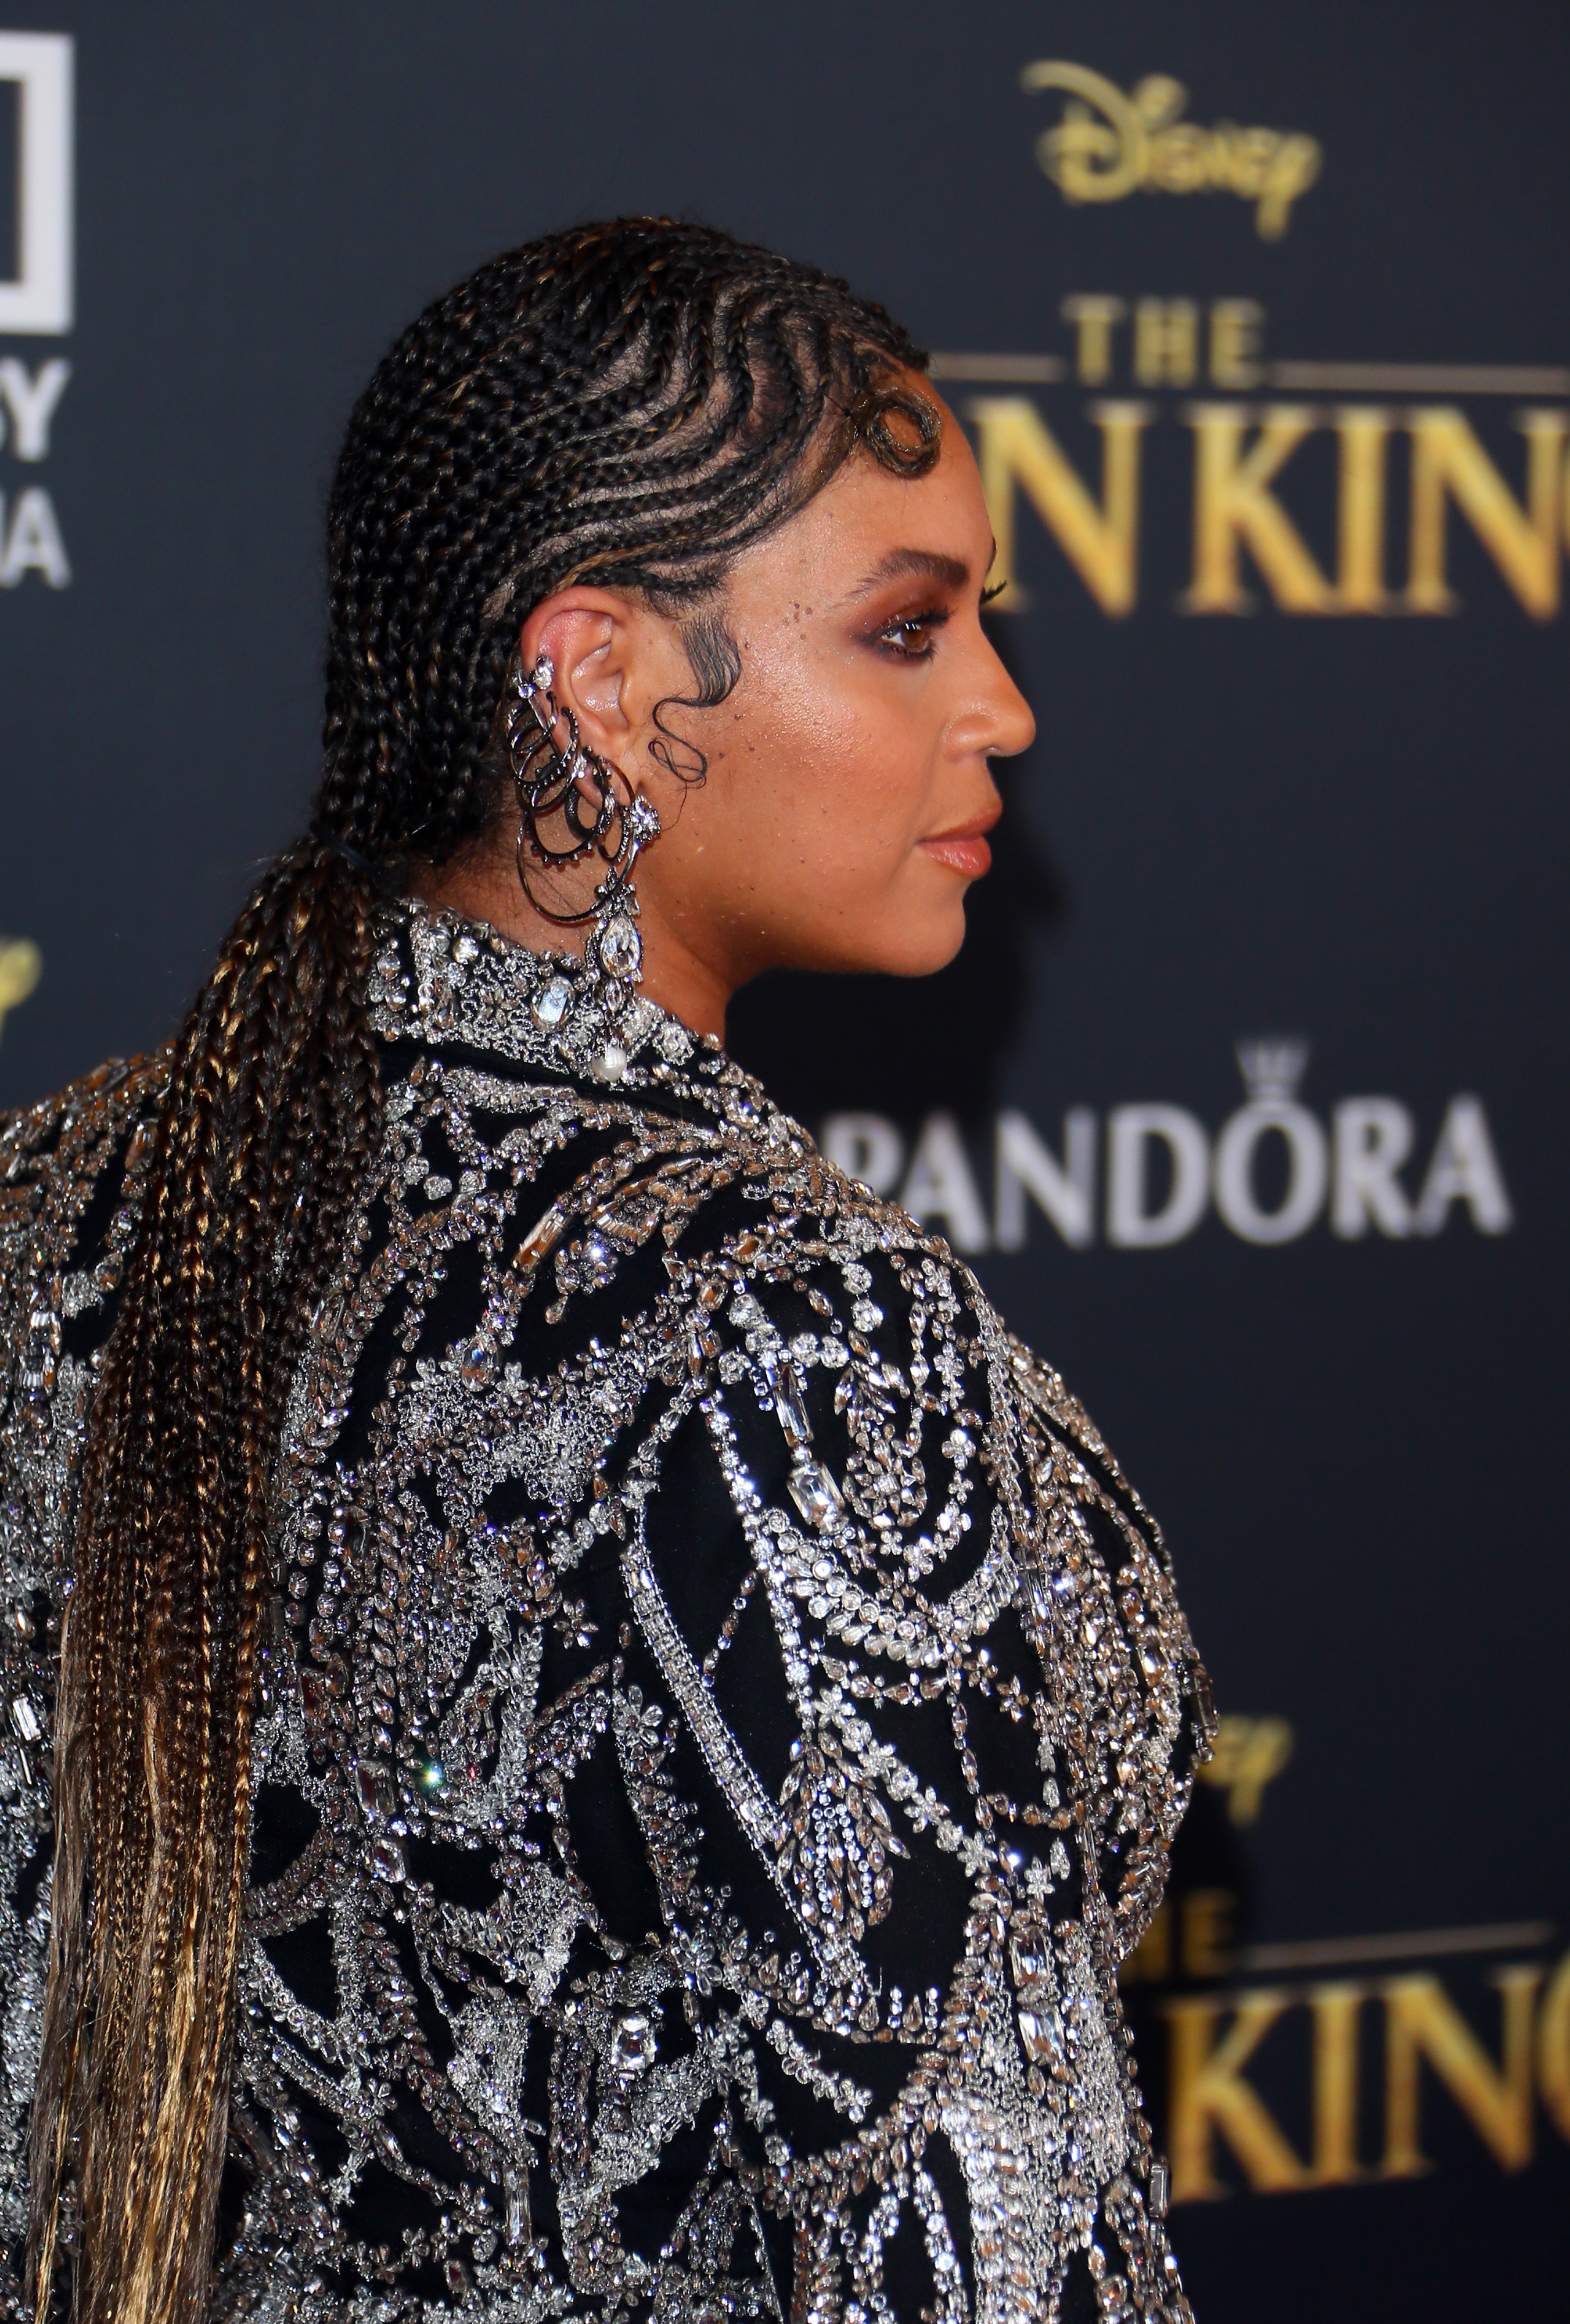 Beyoncé in a beaded dress with intricate patterns, at the Lion King premiere rocking another braided hairstyle